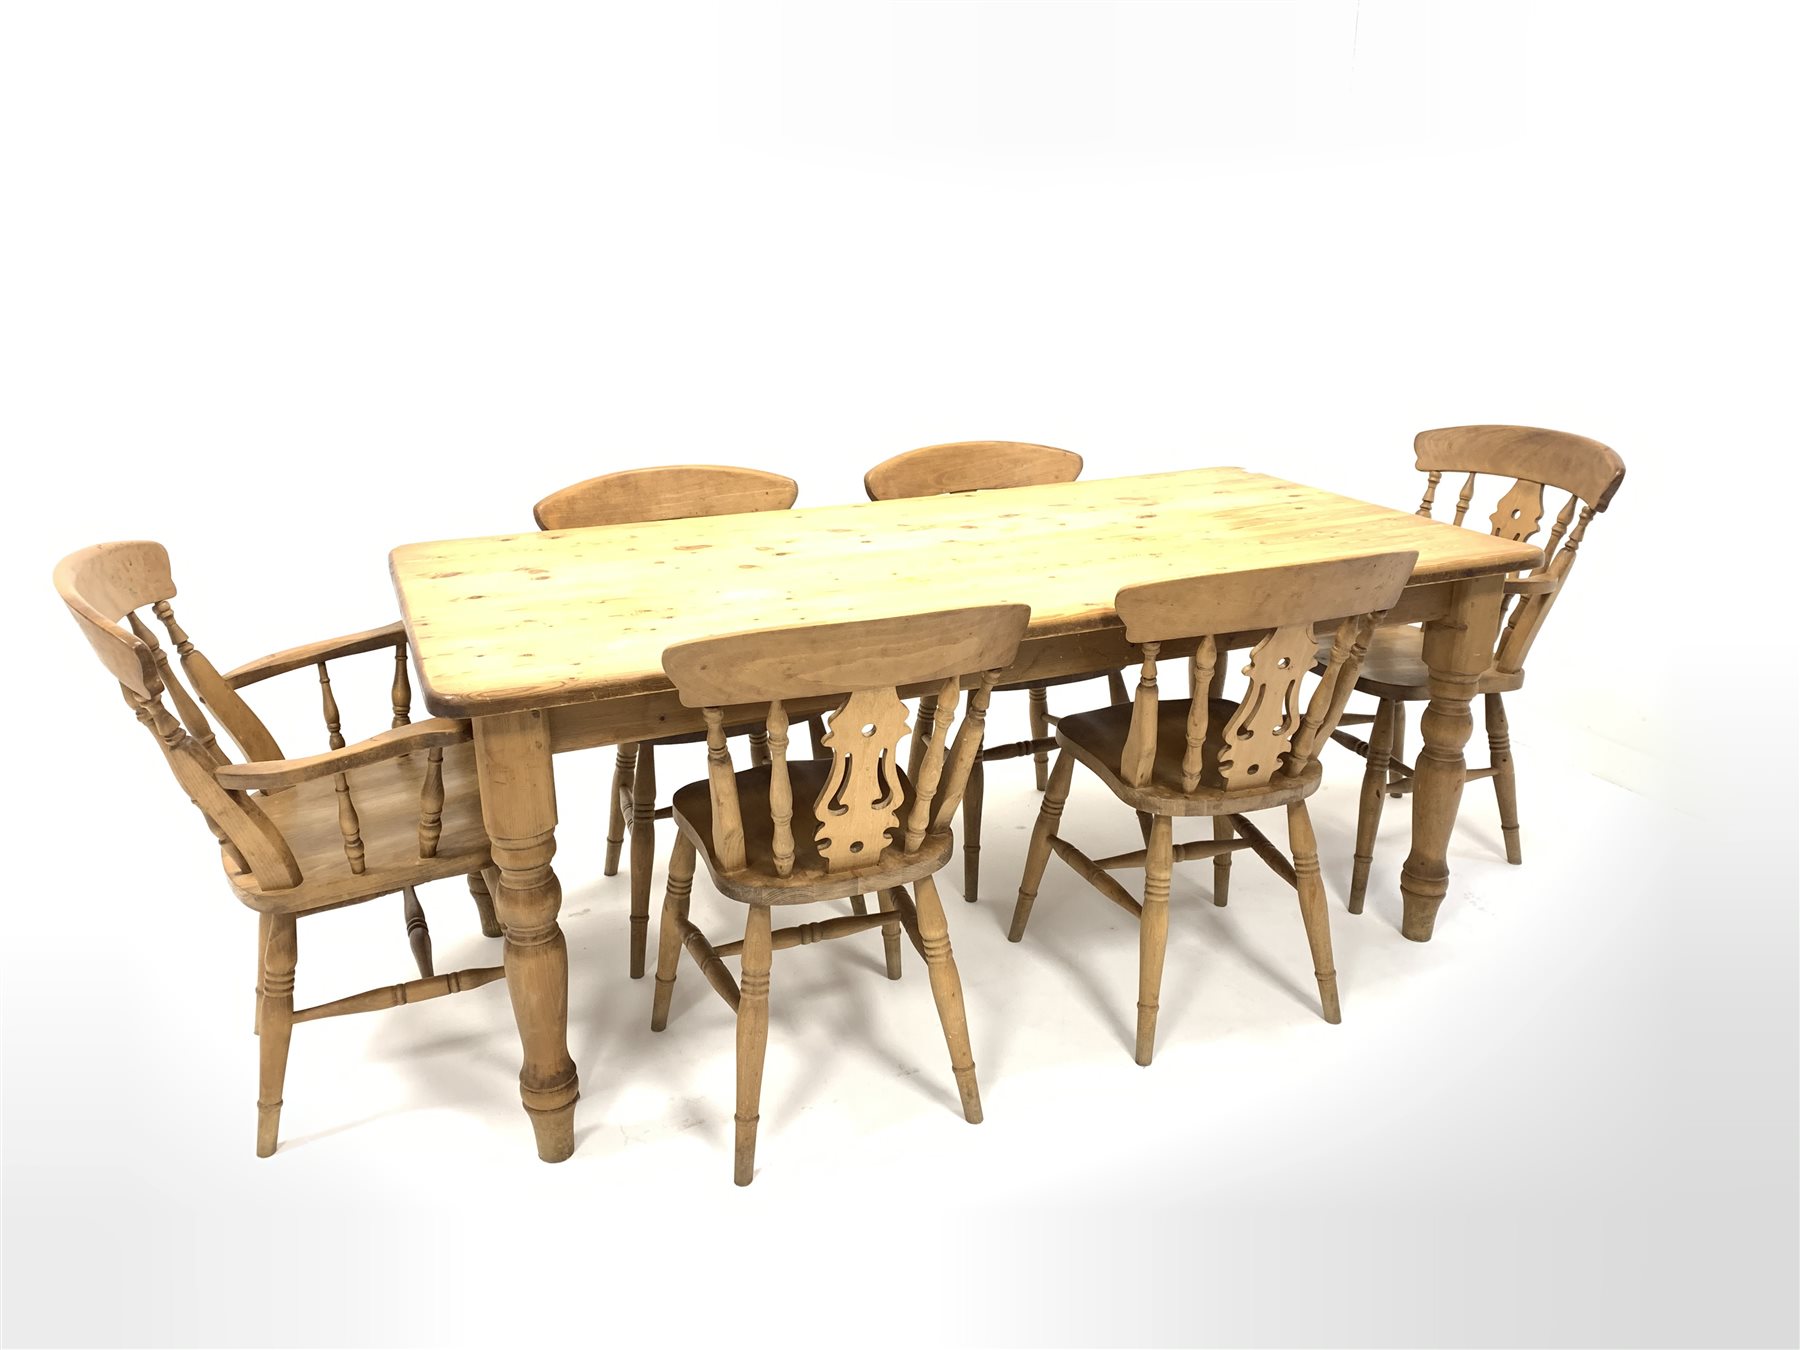 Scrubbed pine farmhouse kitchen dining table, (91cm x 186cm, H76cm) together with a set of six (4+2)